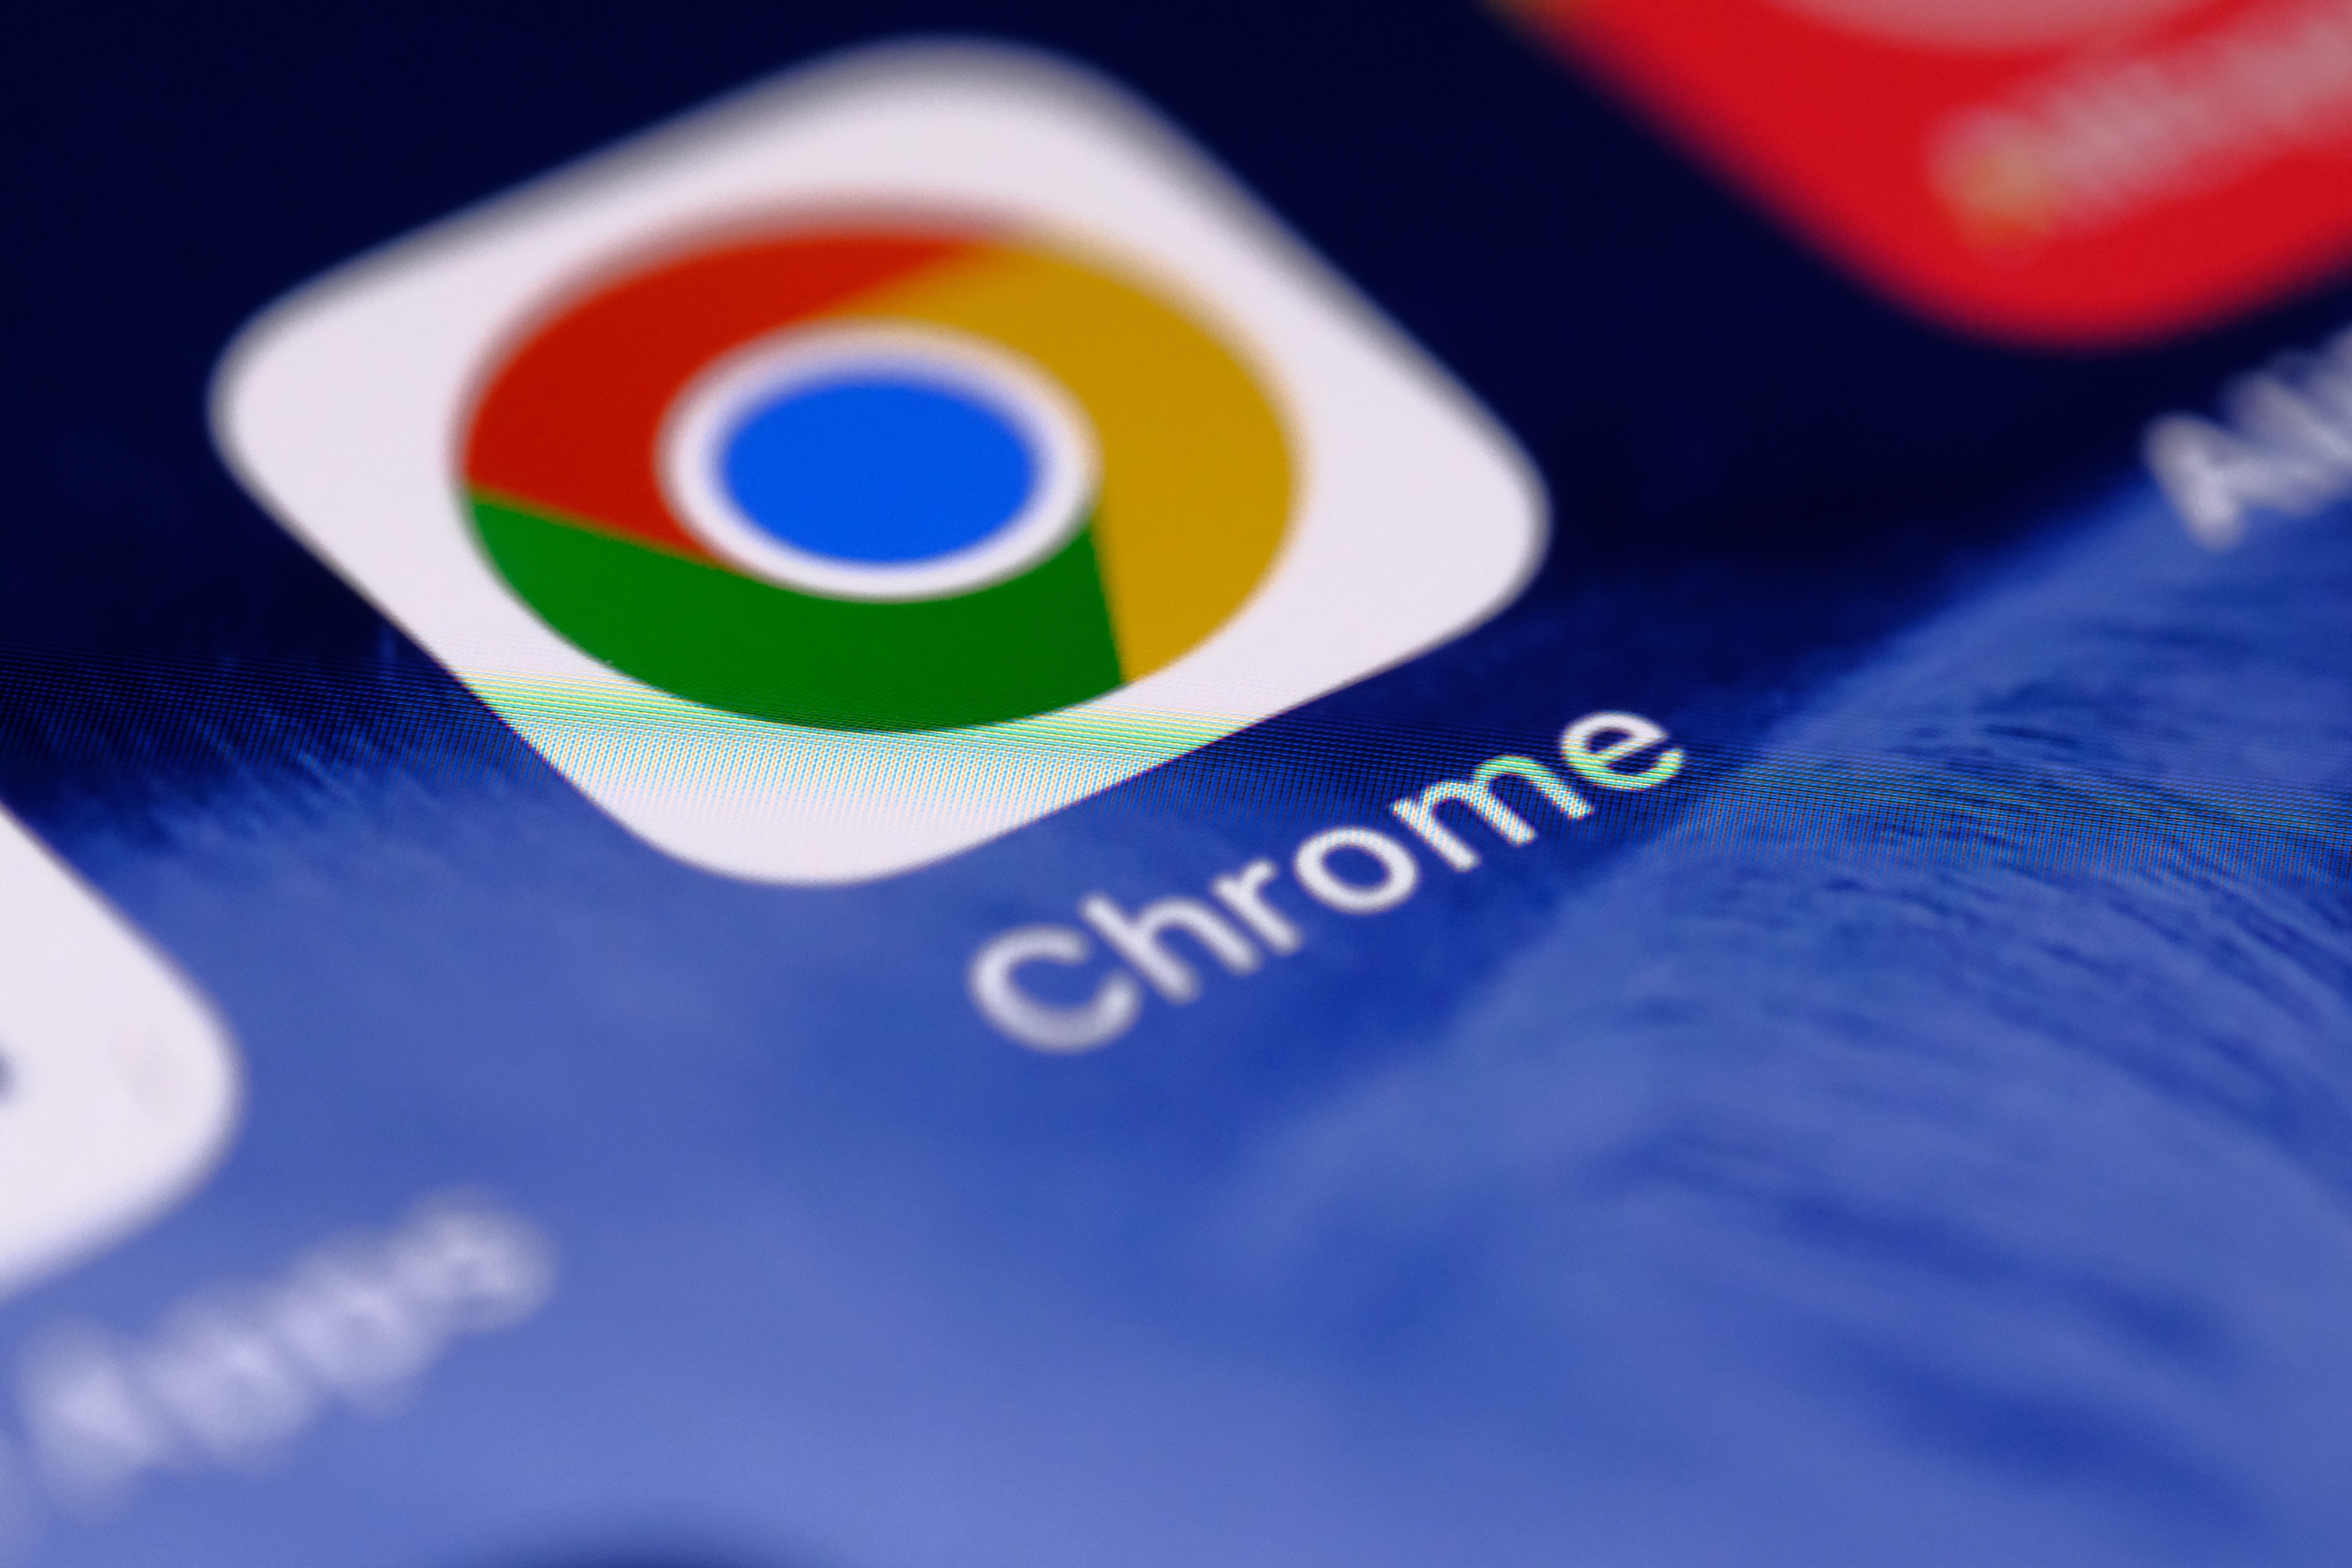 Follow the advice of Google, which recommends updating the Chrome browser for billions of users after discovering 3 security vulnerabilities